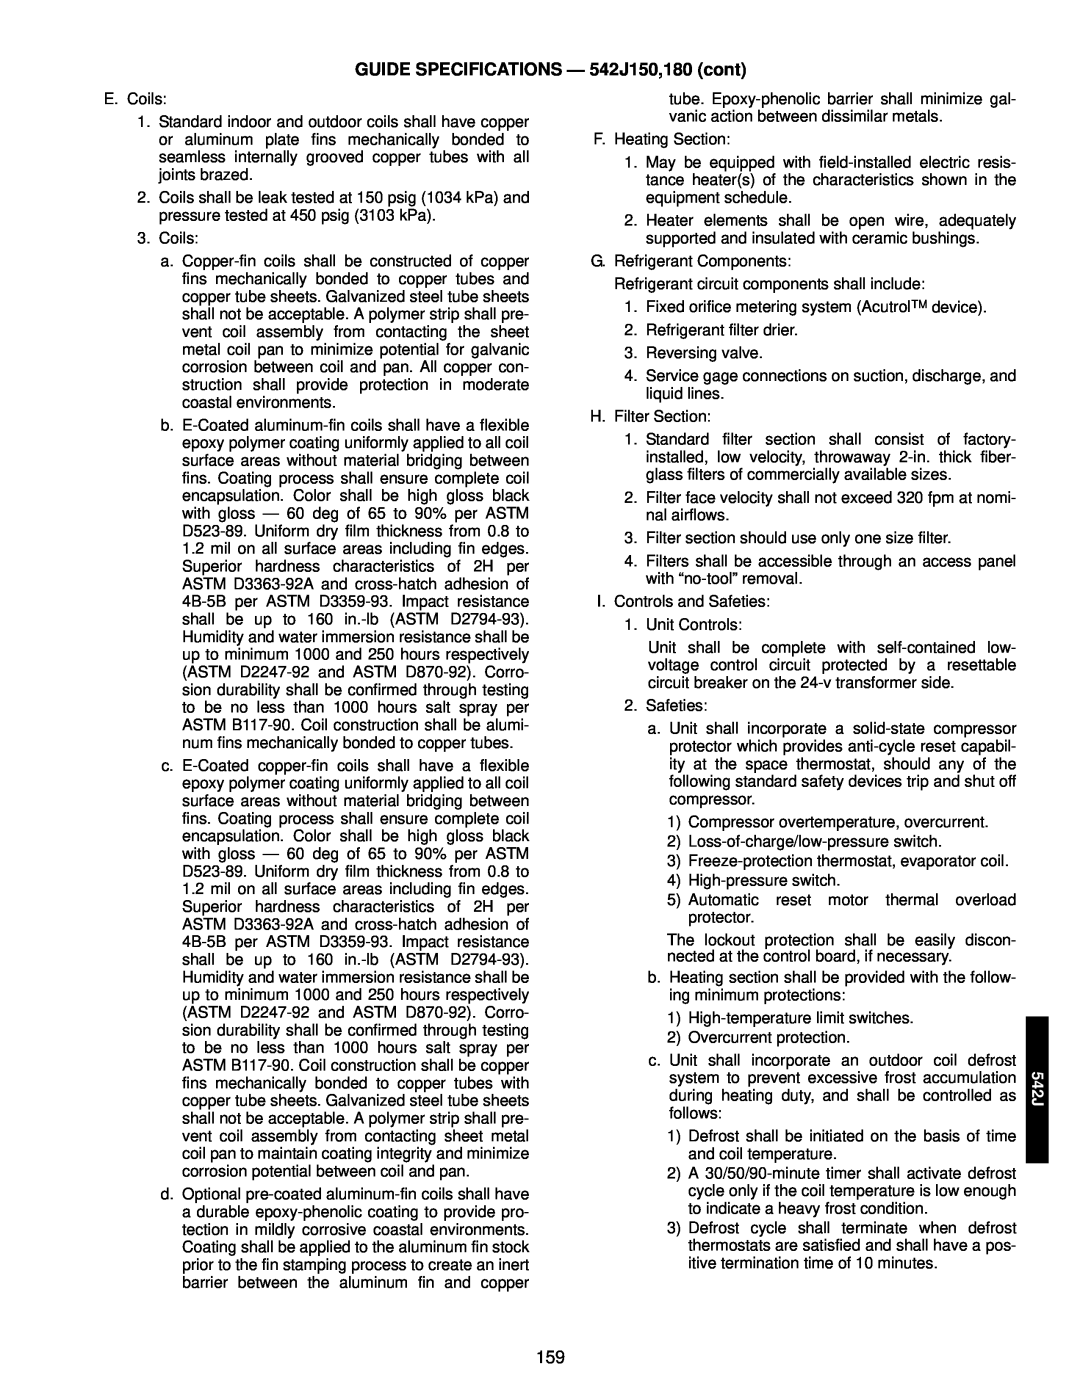 Bryant 549C manual GUIDE SPECIFICATIONS — 542J150,180 cont 